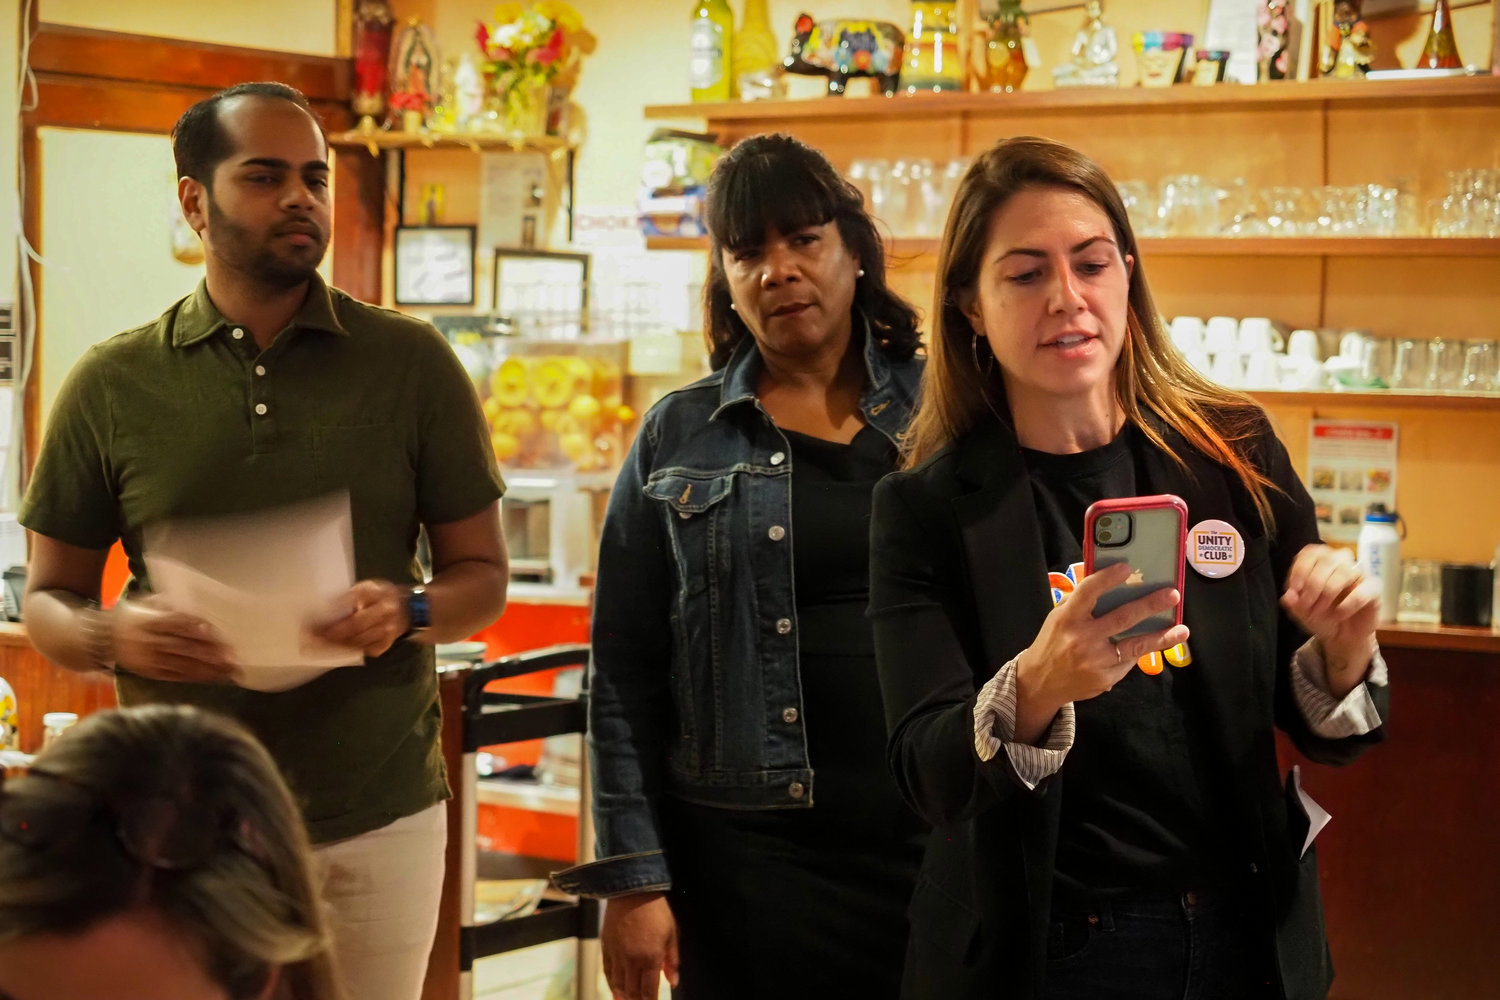 Ramdat Singh, Danielle Guggenheim and Abigail Martin all gave speeches at the Unity Democratic Club’s first meeting in late October. There the club ratified its bylaws, which welcomes any registered Democrat with an interest in the northwest Bronx.